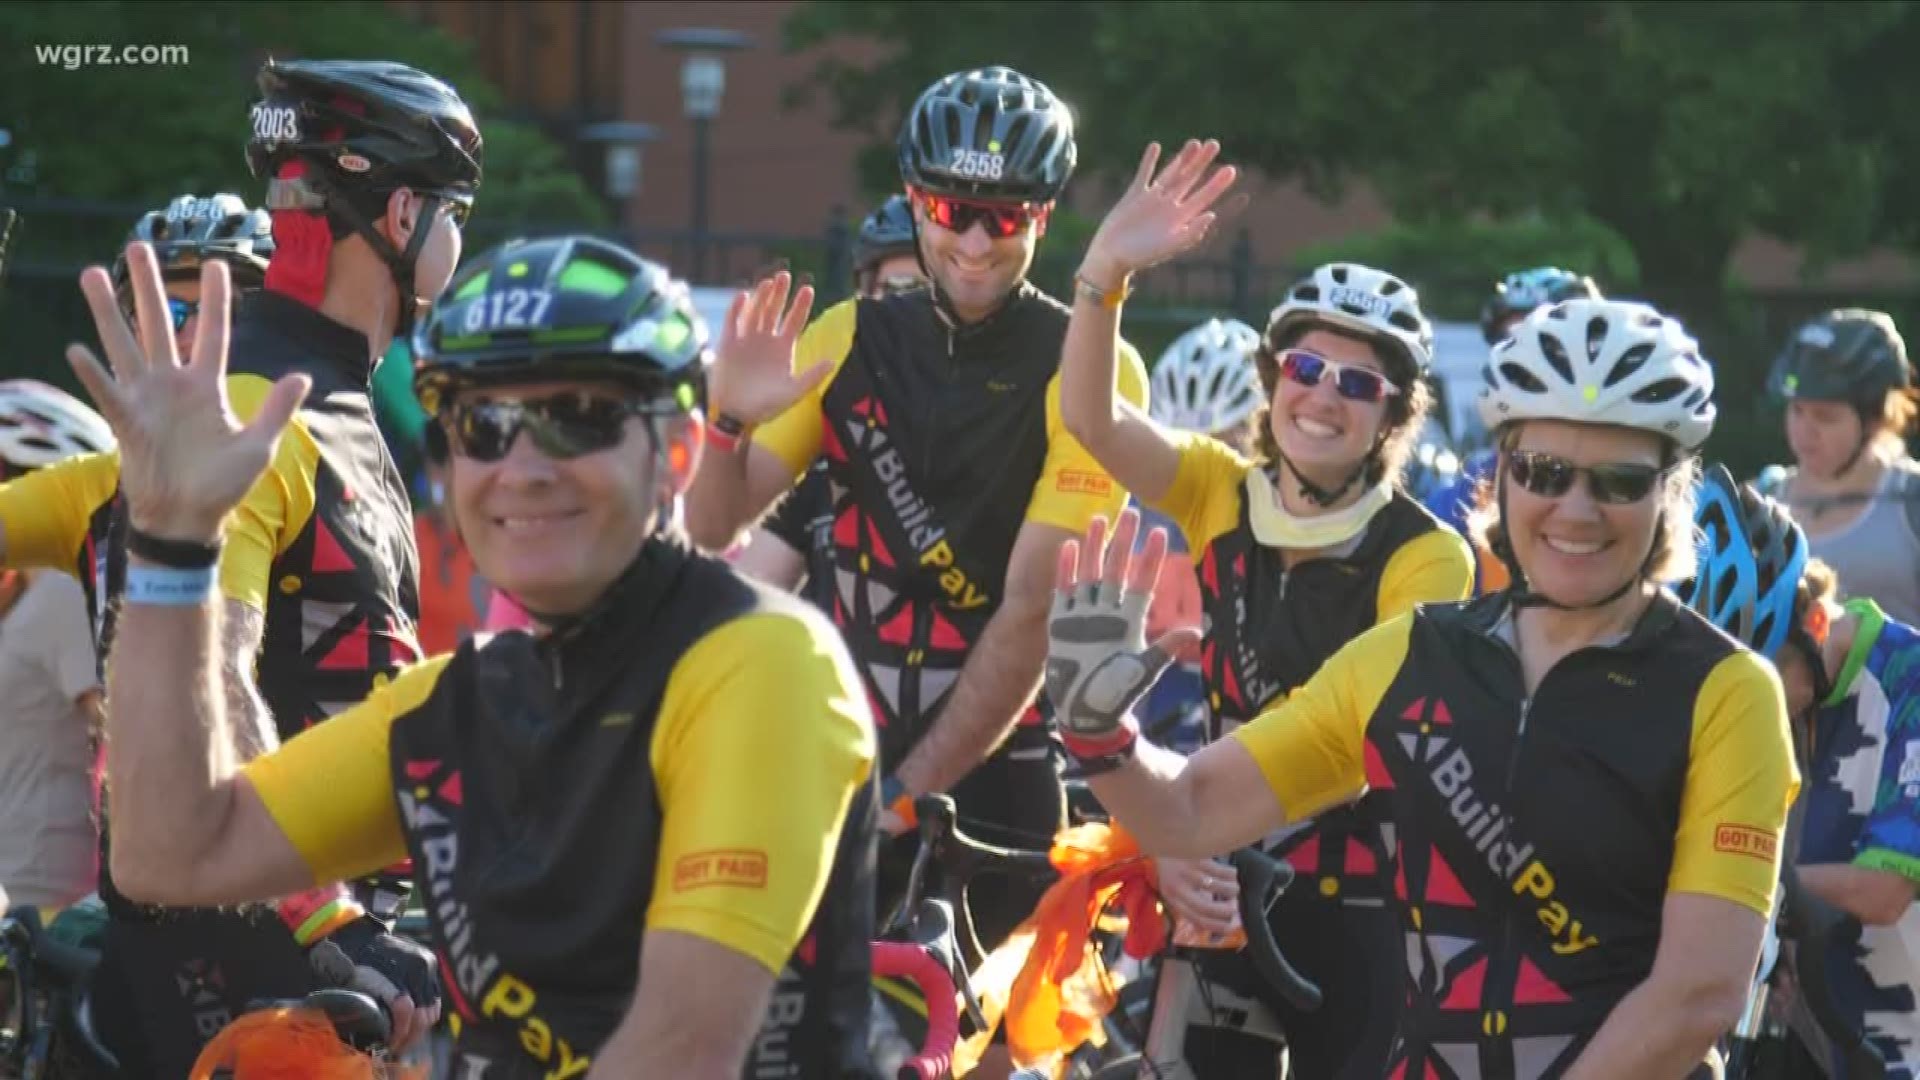 Next weekend of is the annual ride for Roswell.
On Saturday the ride will start at 6 am with 10 different routes riders will embark on.